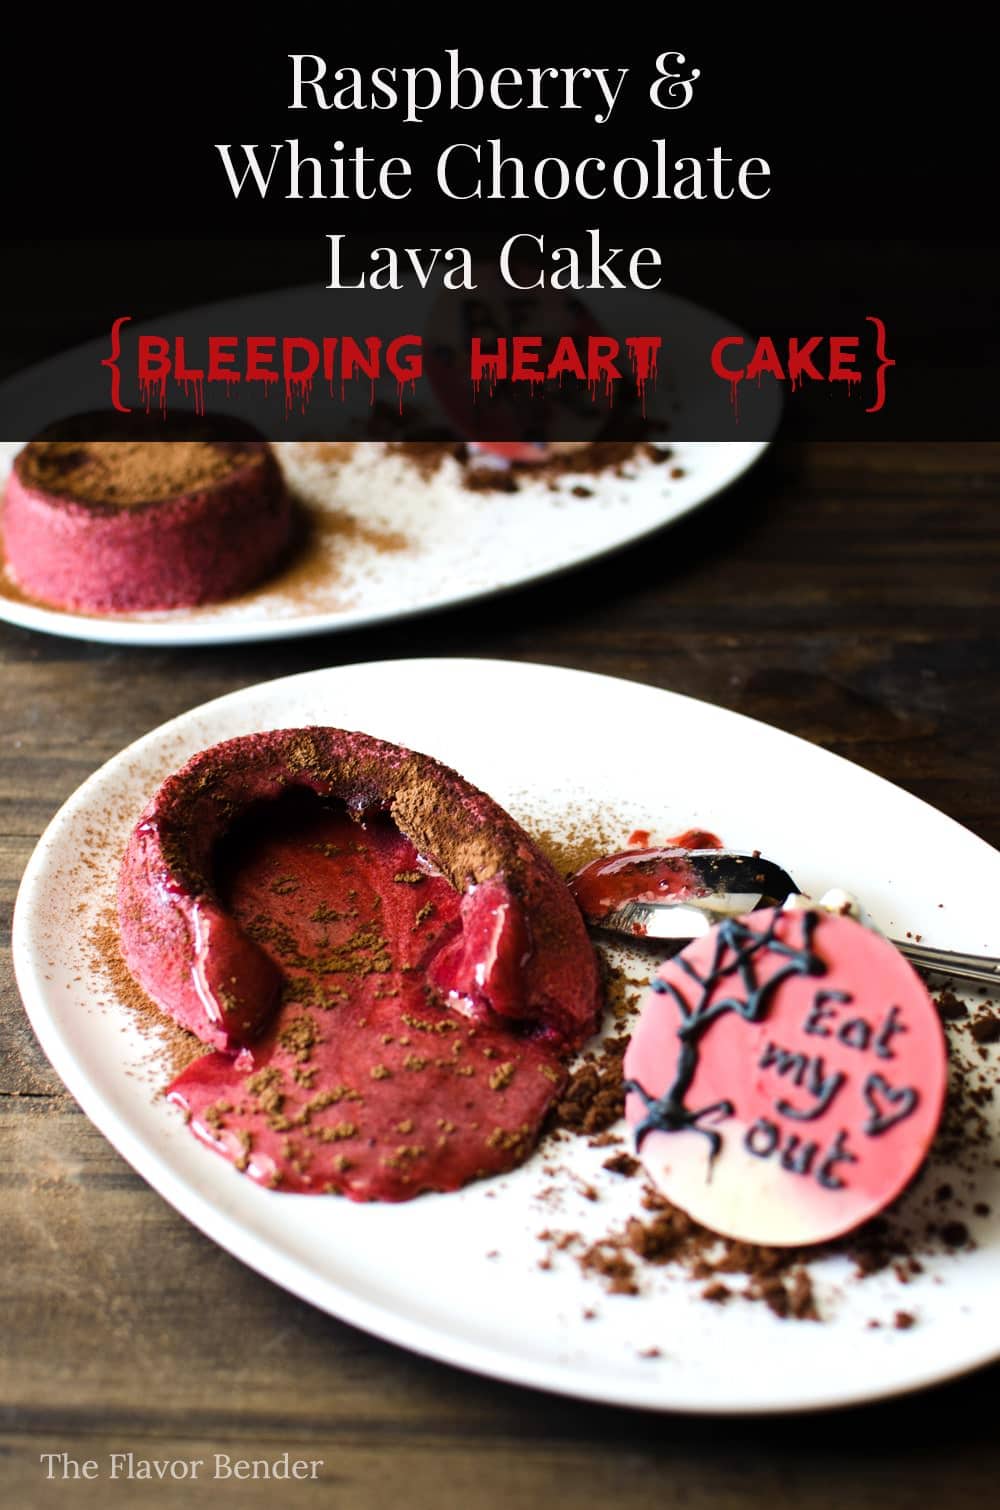 Raspberry White Chocolate Lava Cake {The Bleeding Heart Cake} - A delightfully decadent cake that is deliciously grotesque for Halloween or disturbingly romantic for valentines! The perfect dessert for the overly attached girlfriend!